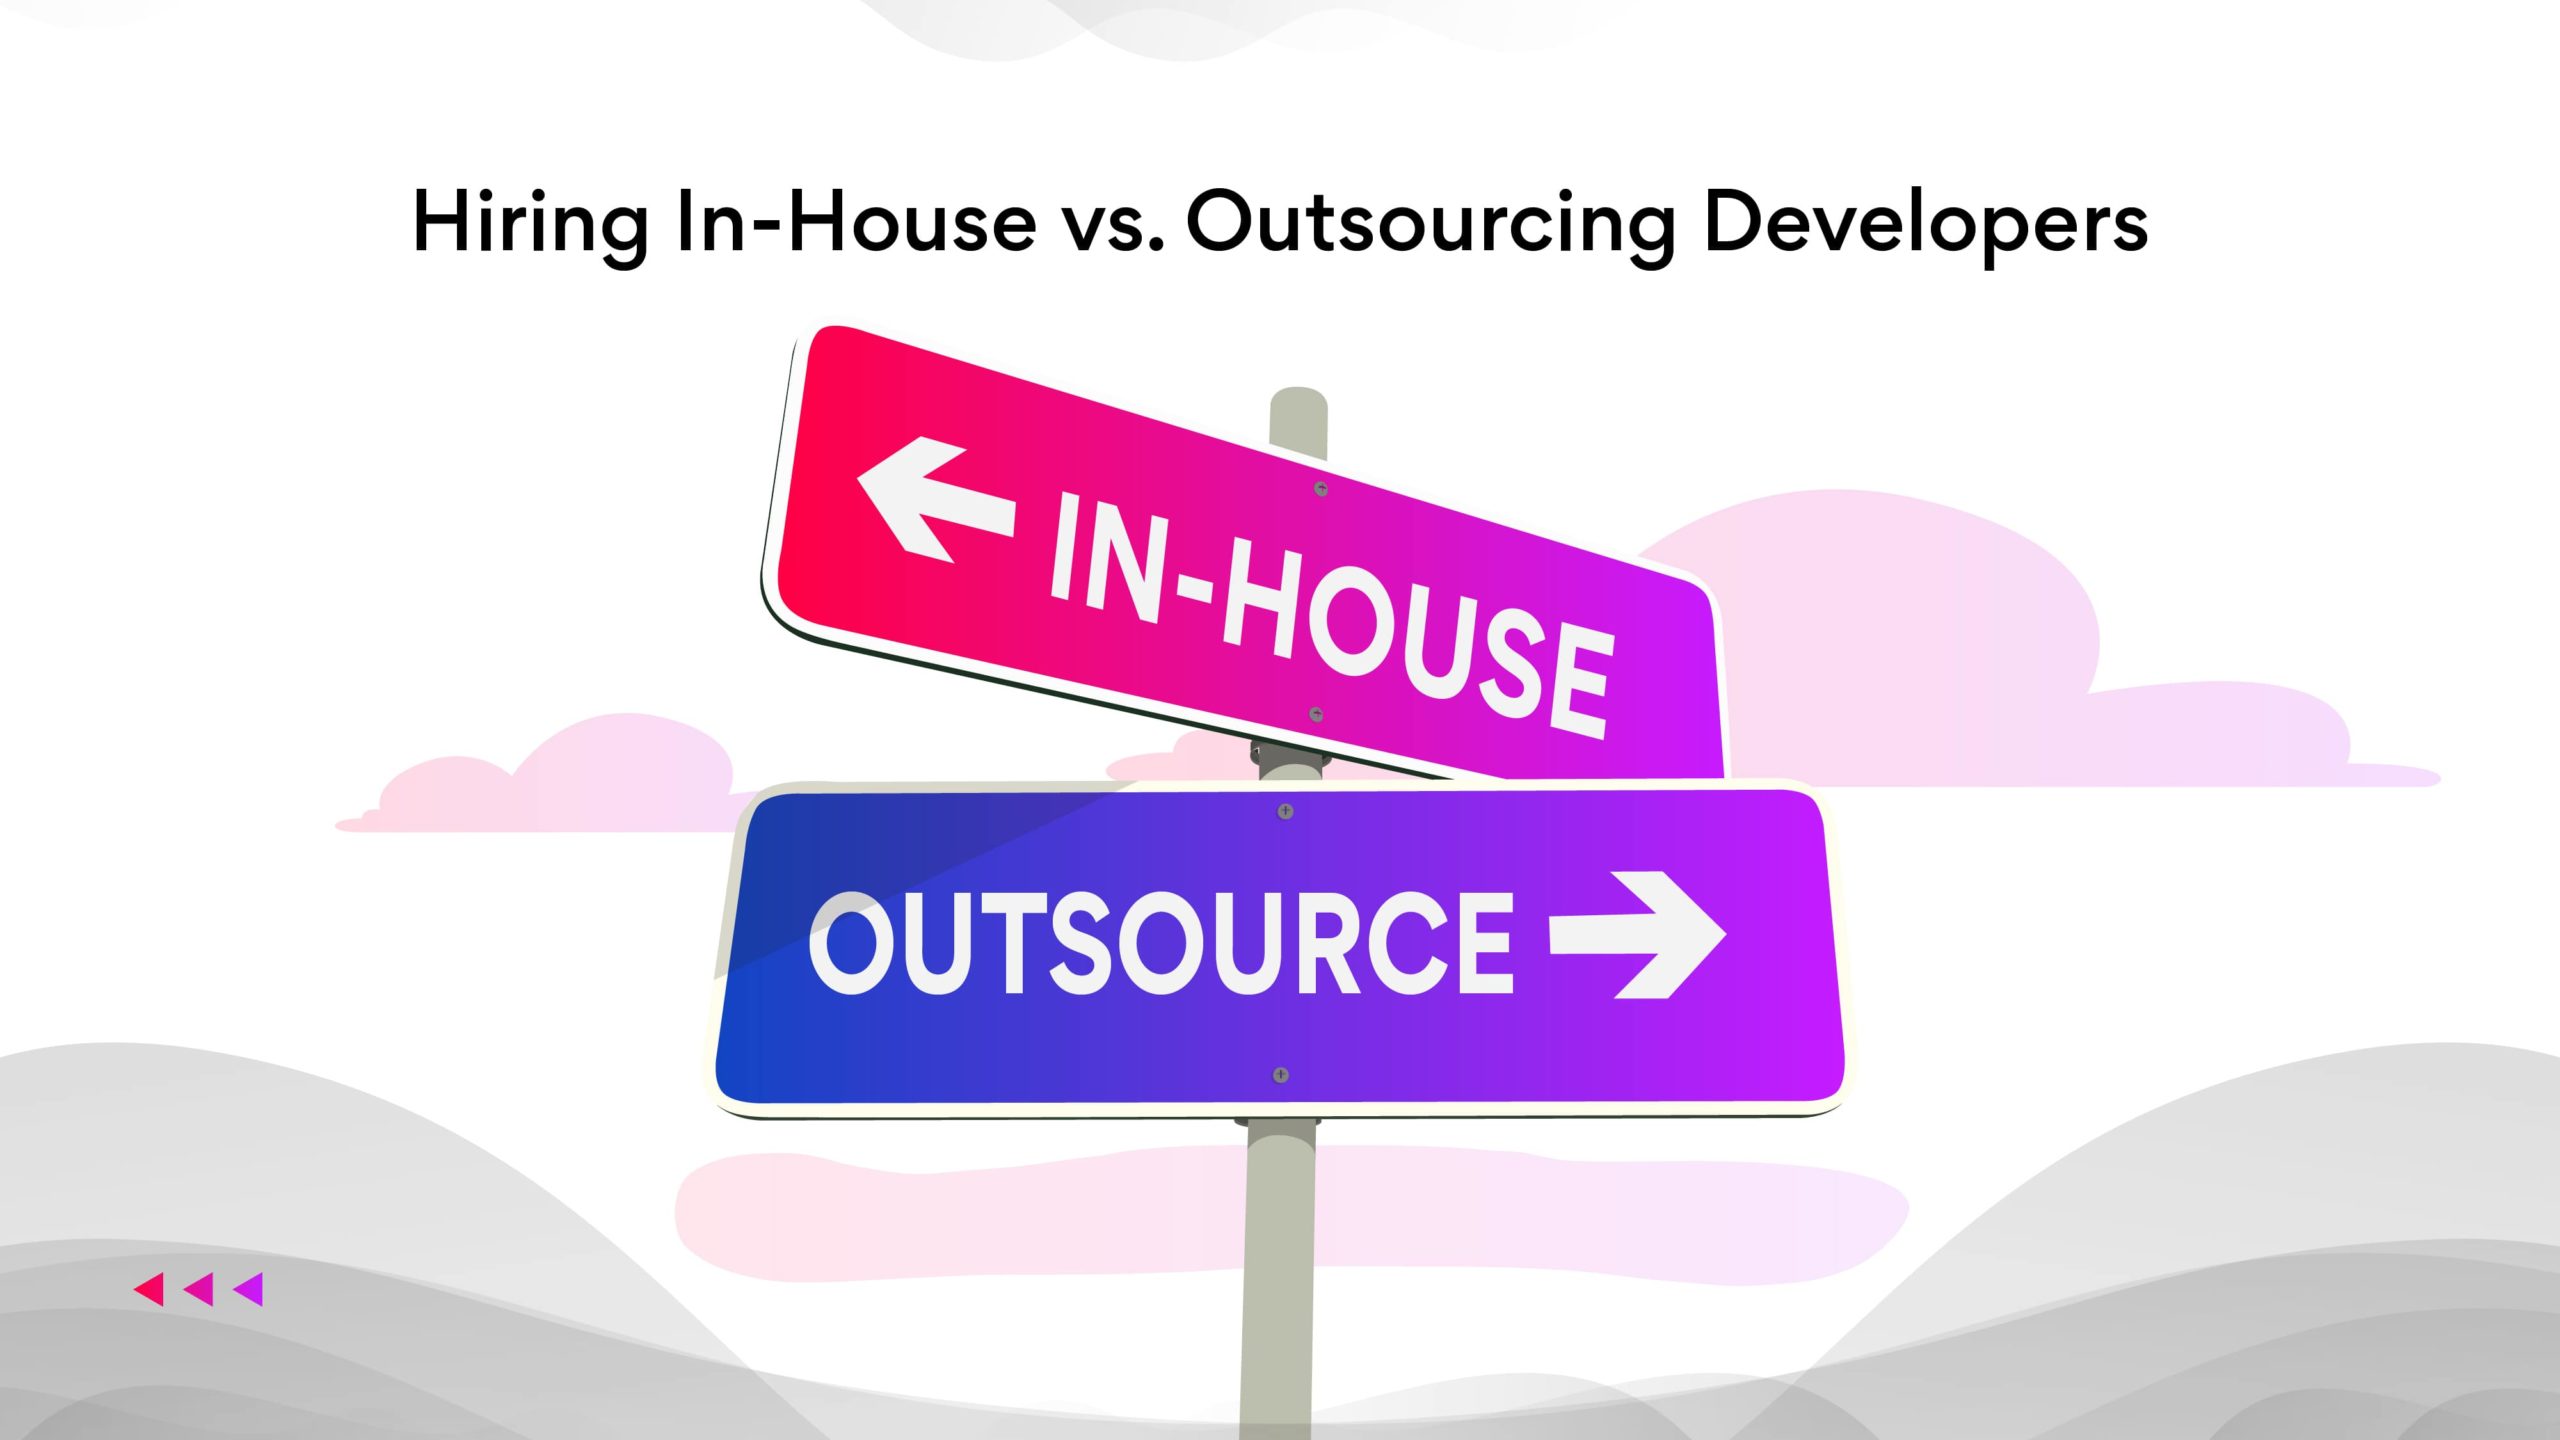 In-House vs Outsourcing: Which Hiring Process Is Better?